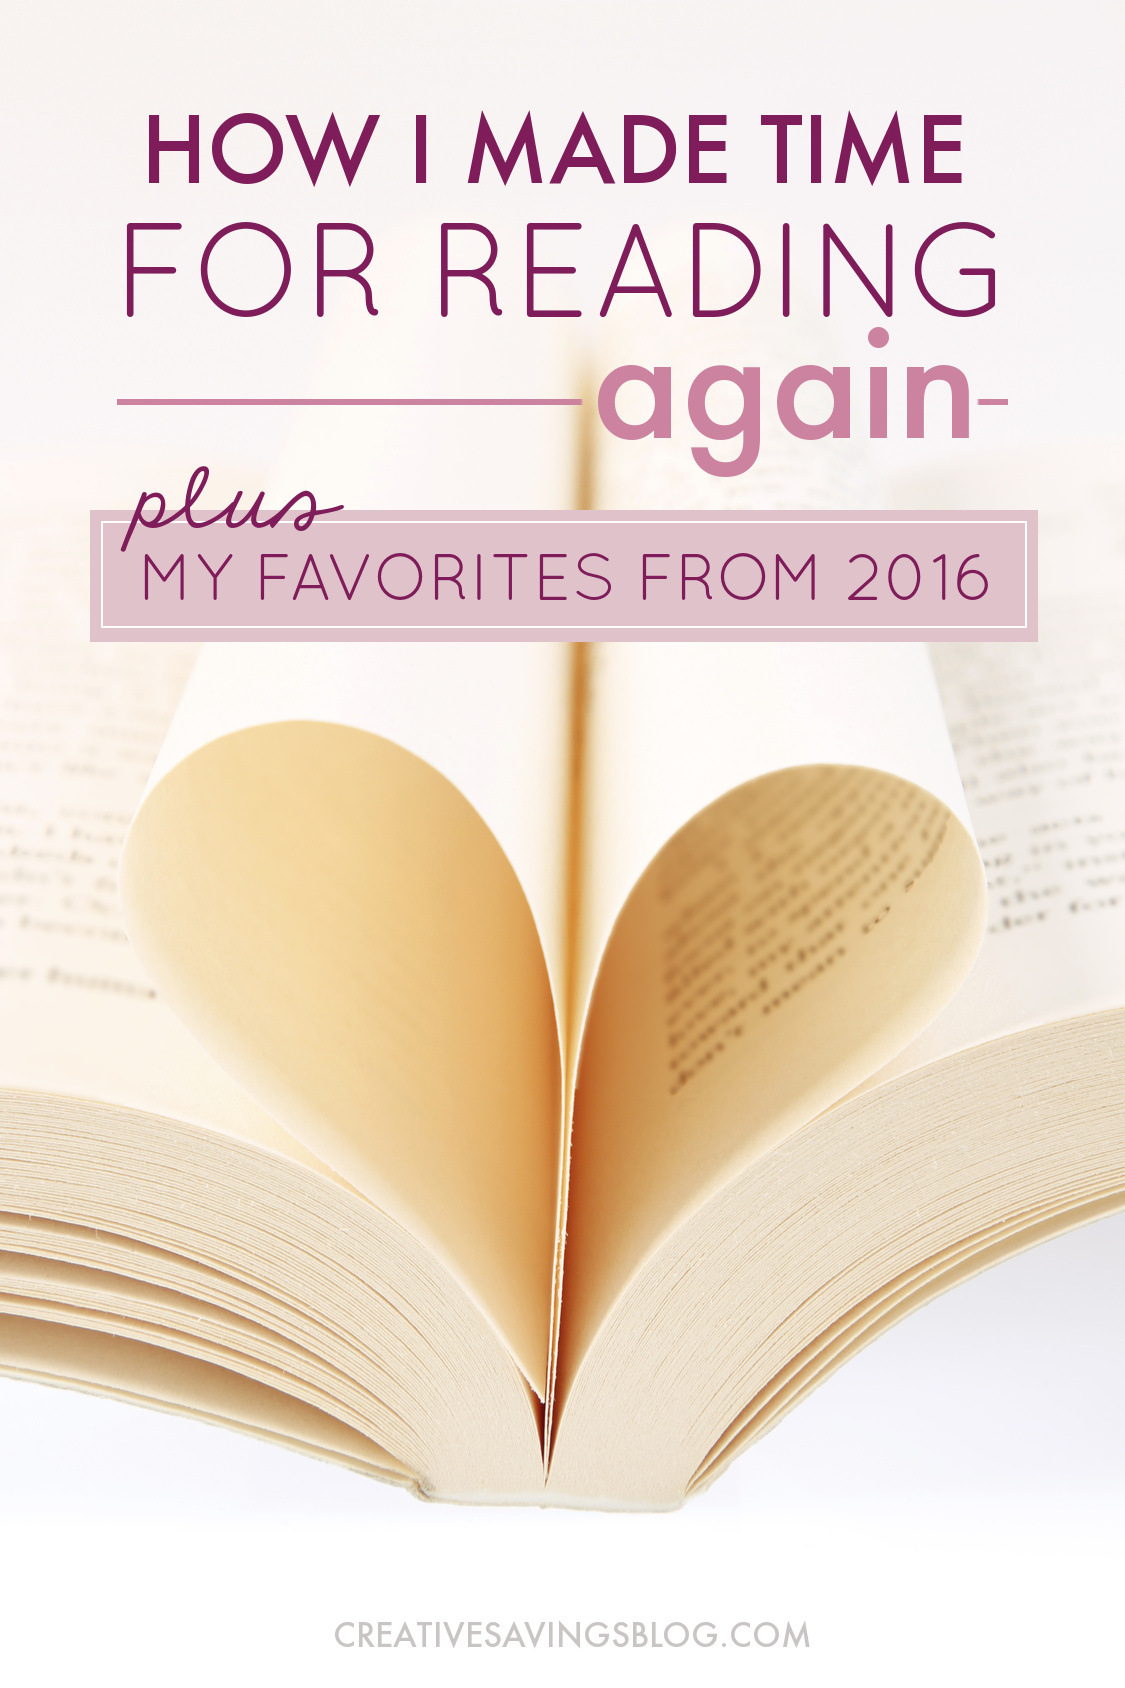 If you’re frustrated because you don’t have much {if any} time to read, I've got three practical solutions to help make reading a priority in your life again. Plus, I’m sharing my FAVORITE books from 2016 to help jumpstart your list! #reading #timeforreading #favoritereads #fridayfavorites #howtomaketimeforreading